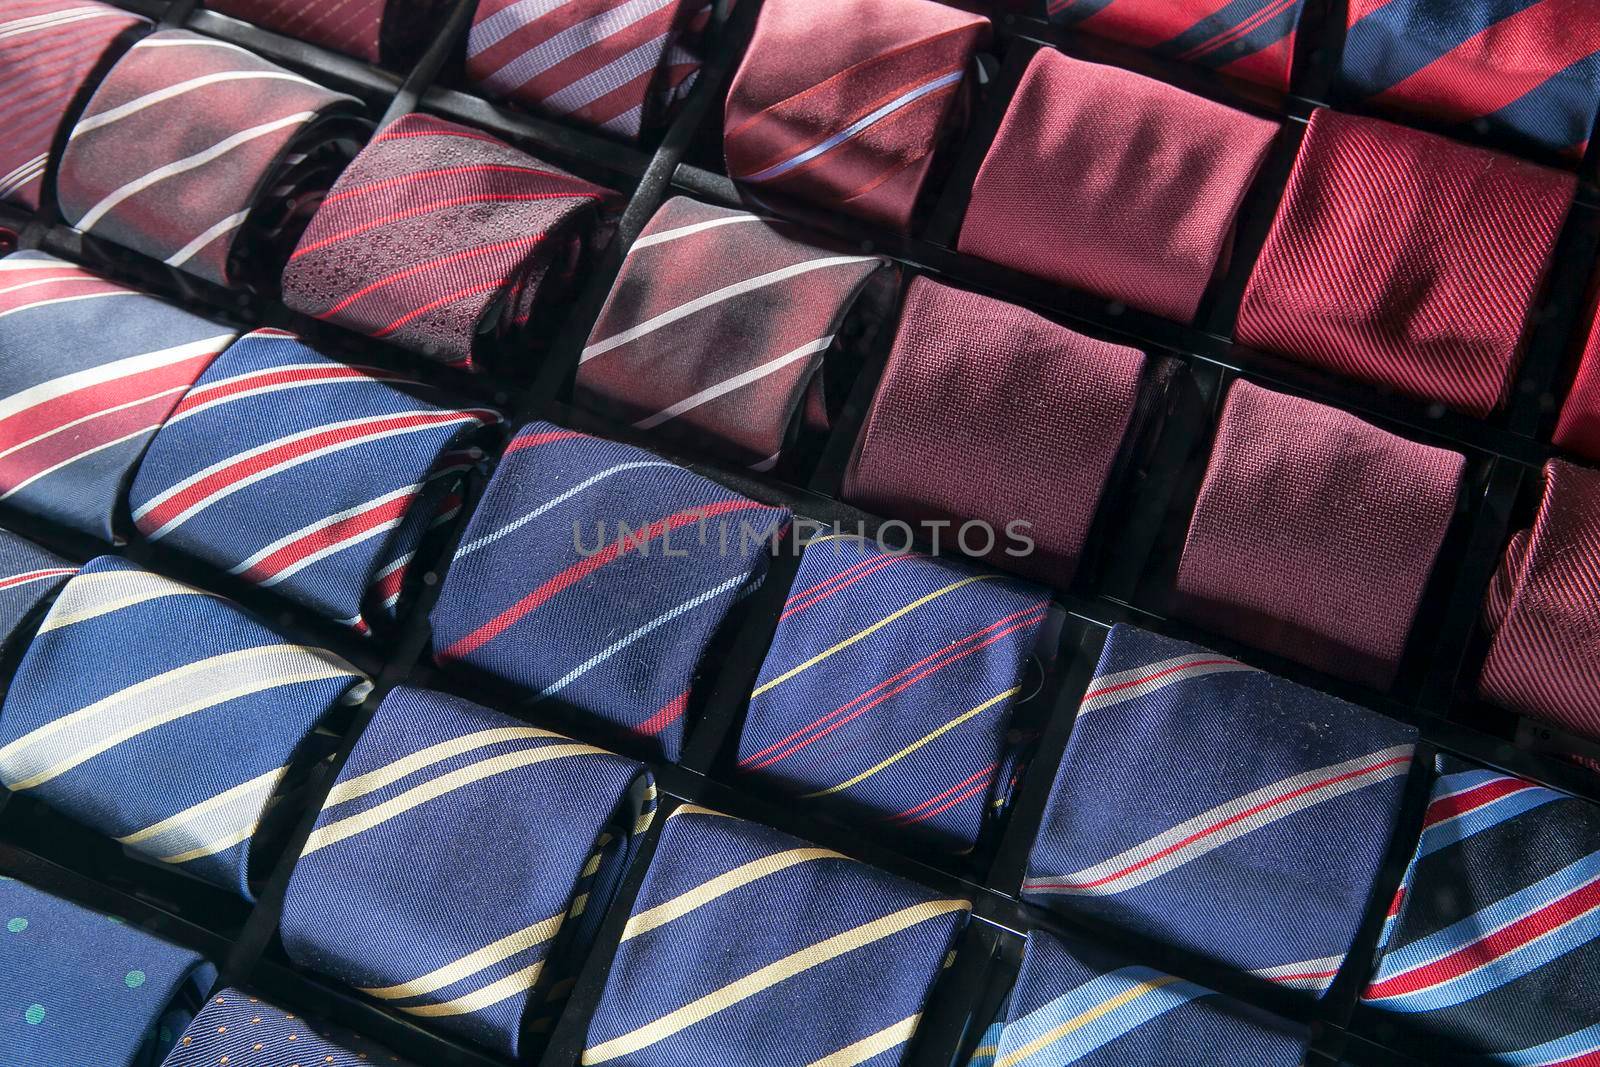 Men's silk ties are laid out from burgundy to blue in special compartments for ties